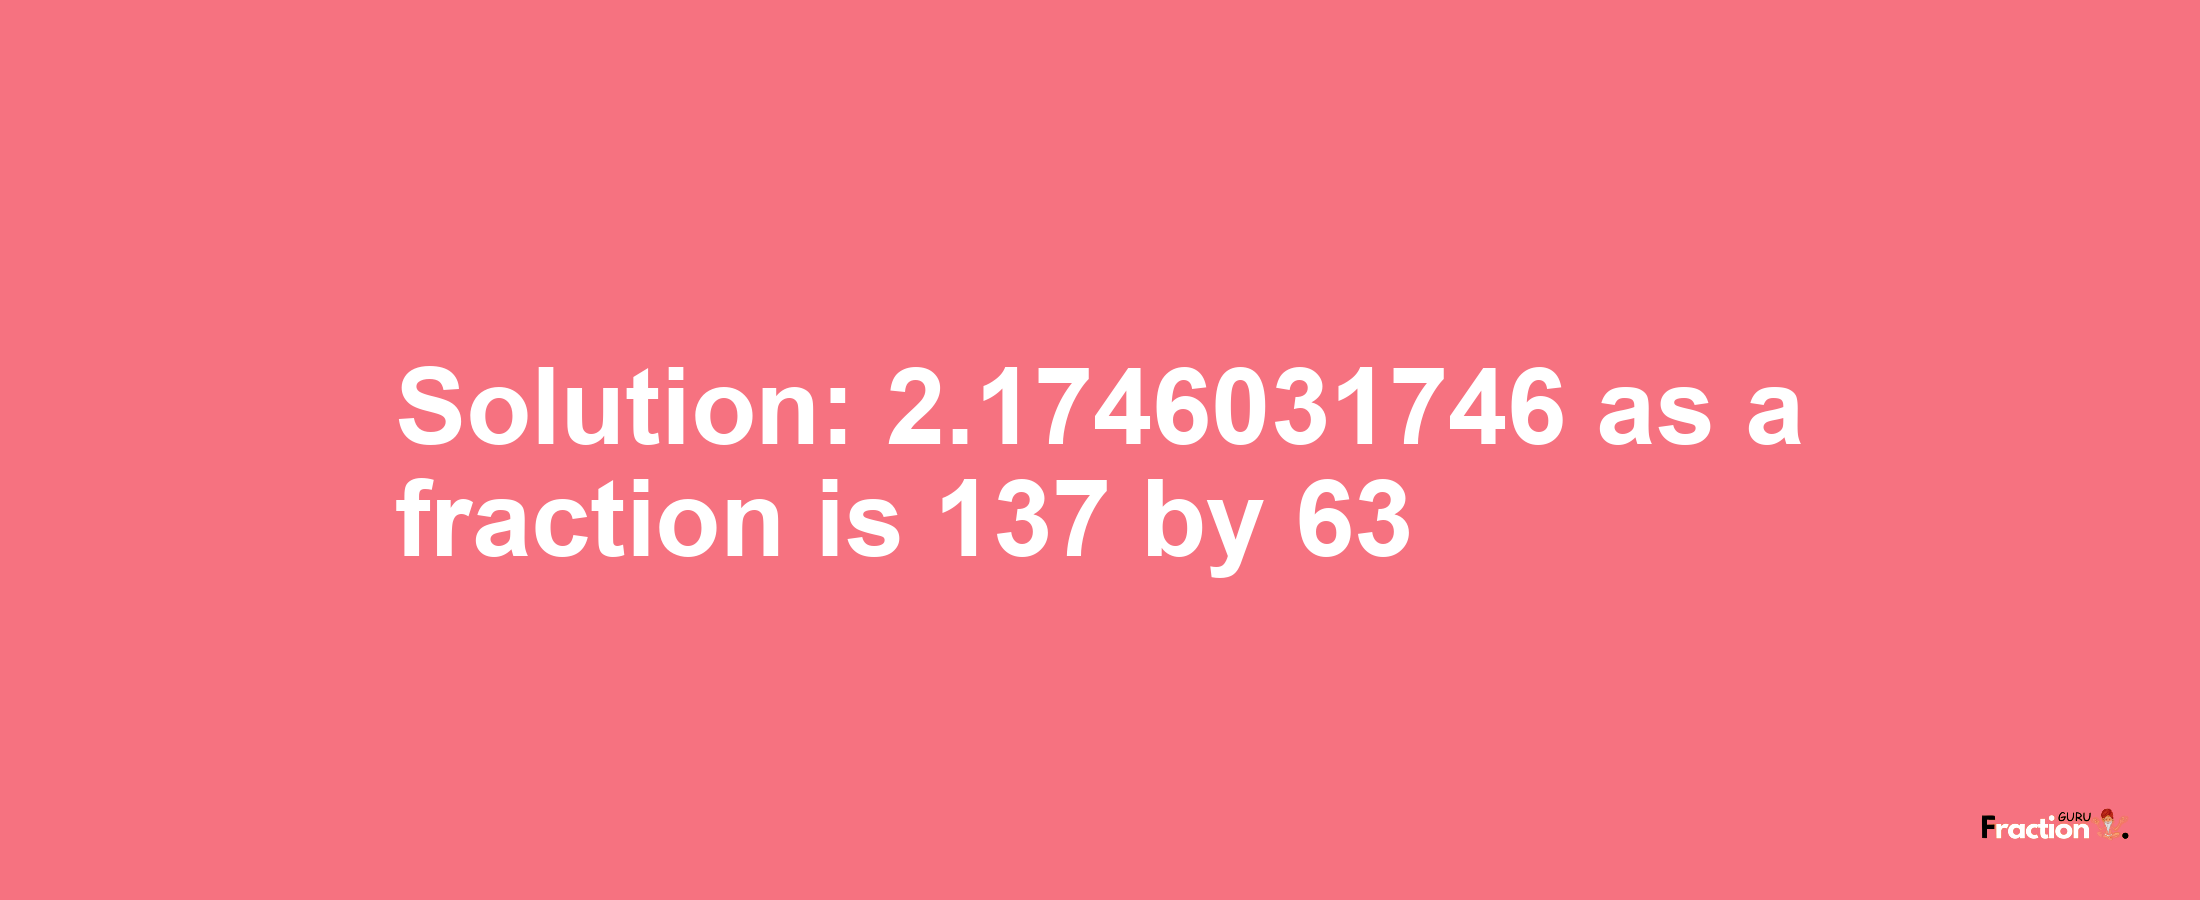 Solution:2.1746031746 as a fraction is 137/63